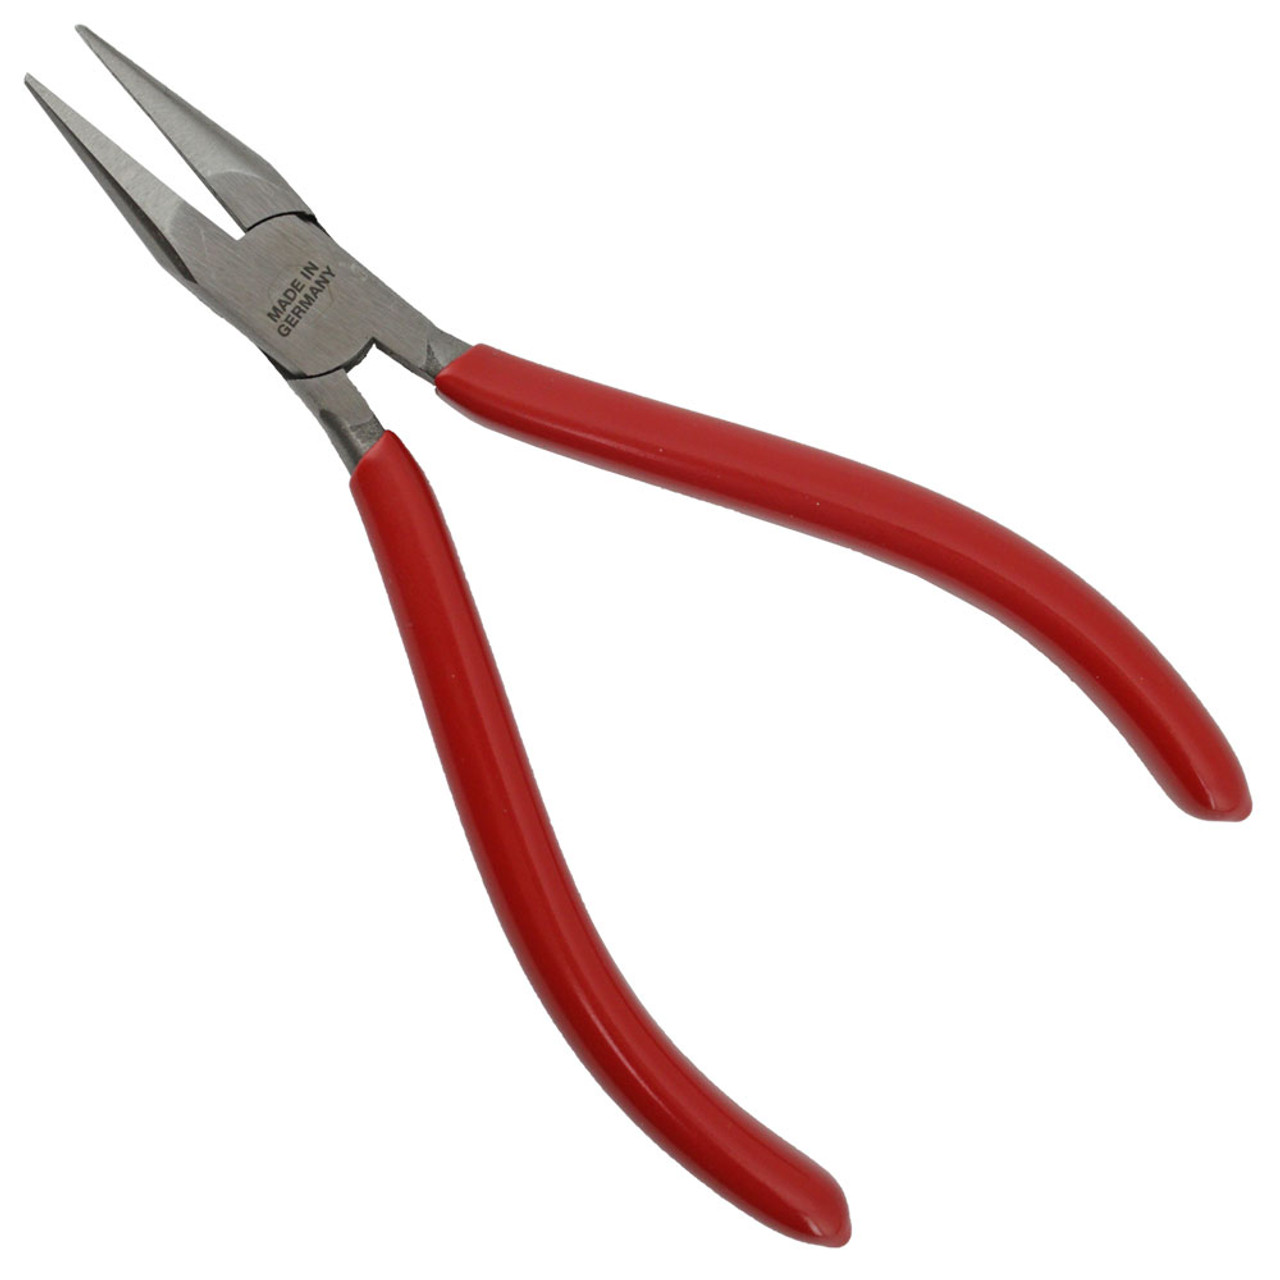 German Pliers 4 1/2 Inches Lap Joint